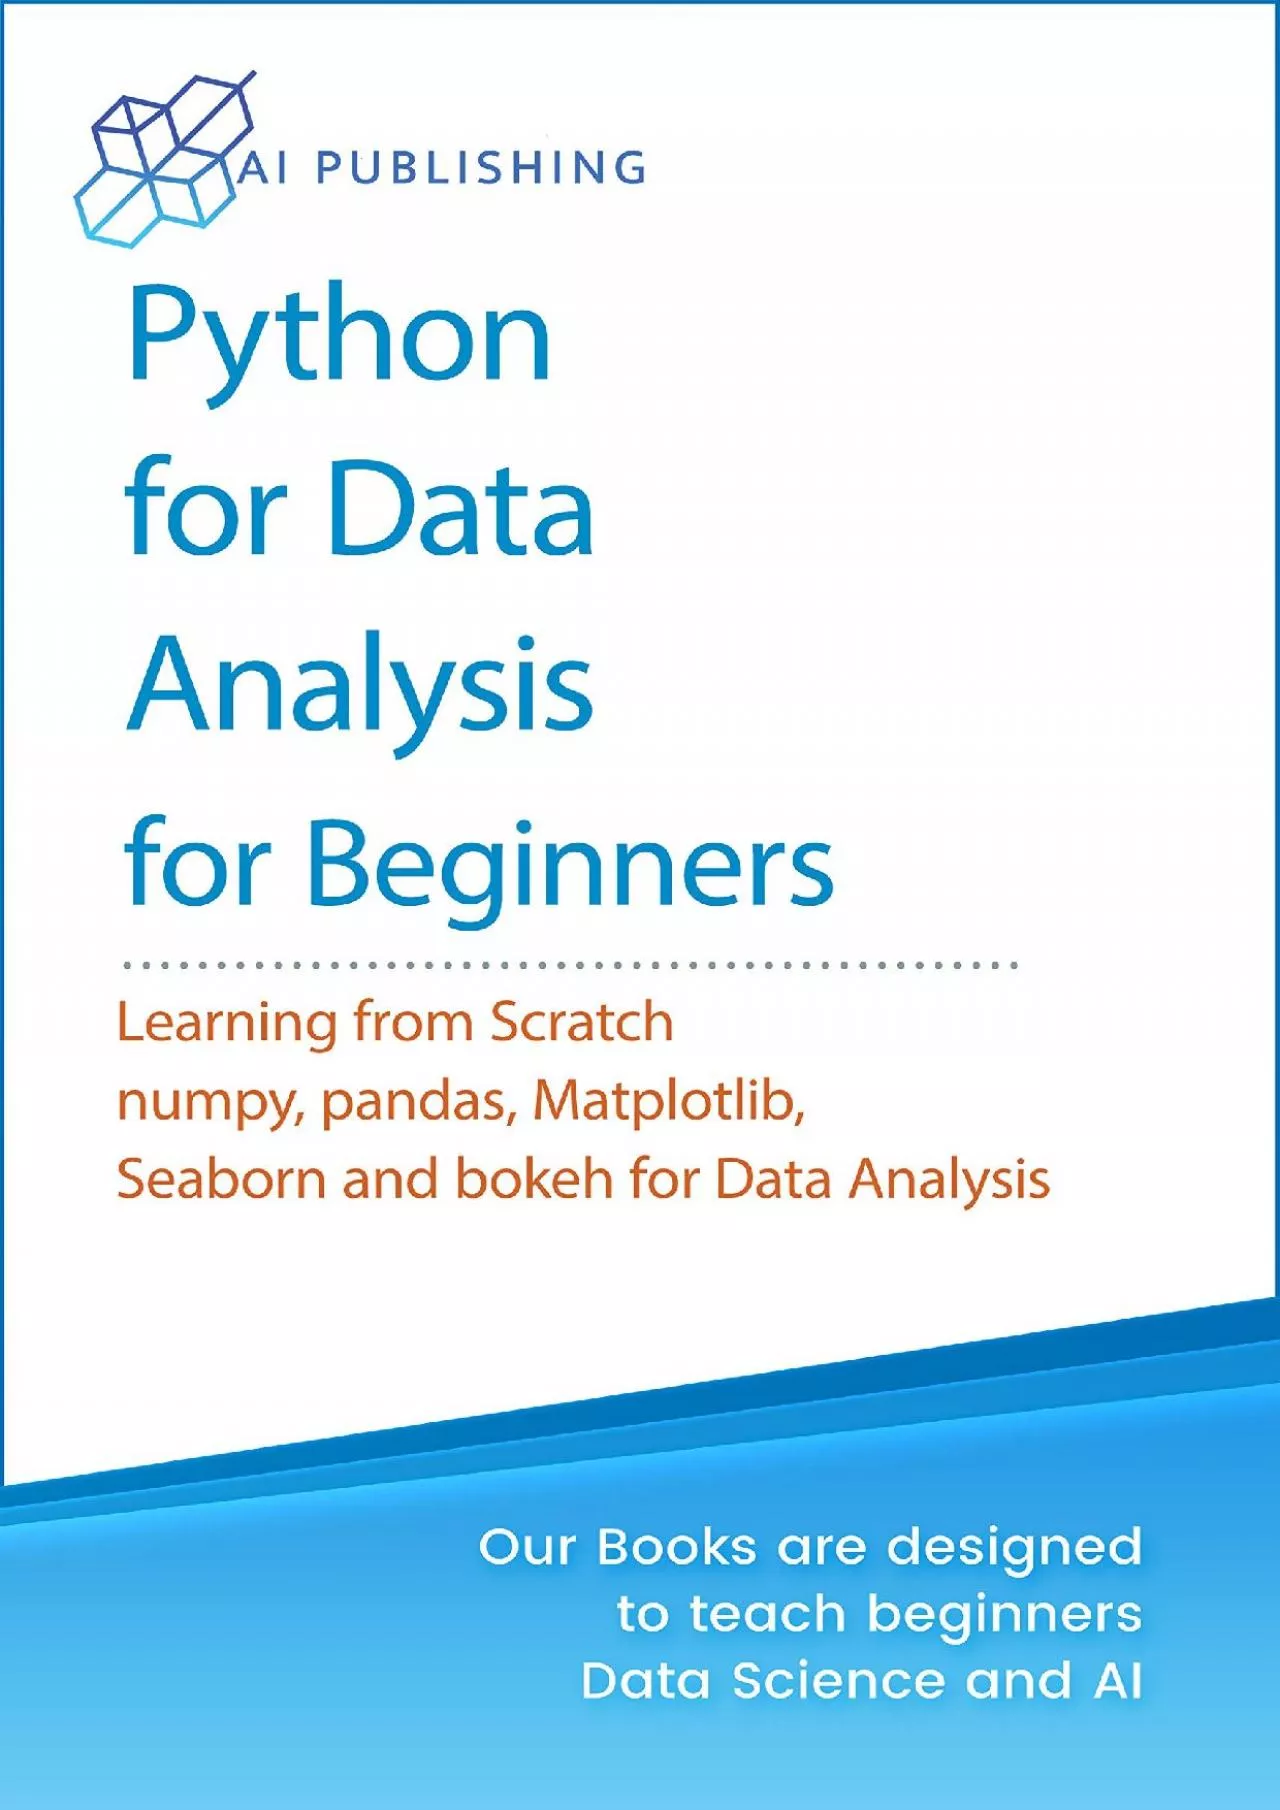 [FREE]-Python for Data Analysis A Complete Beginner Guide for Python basics, Numpy, Pandas,